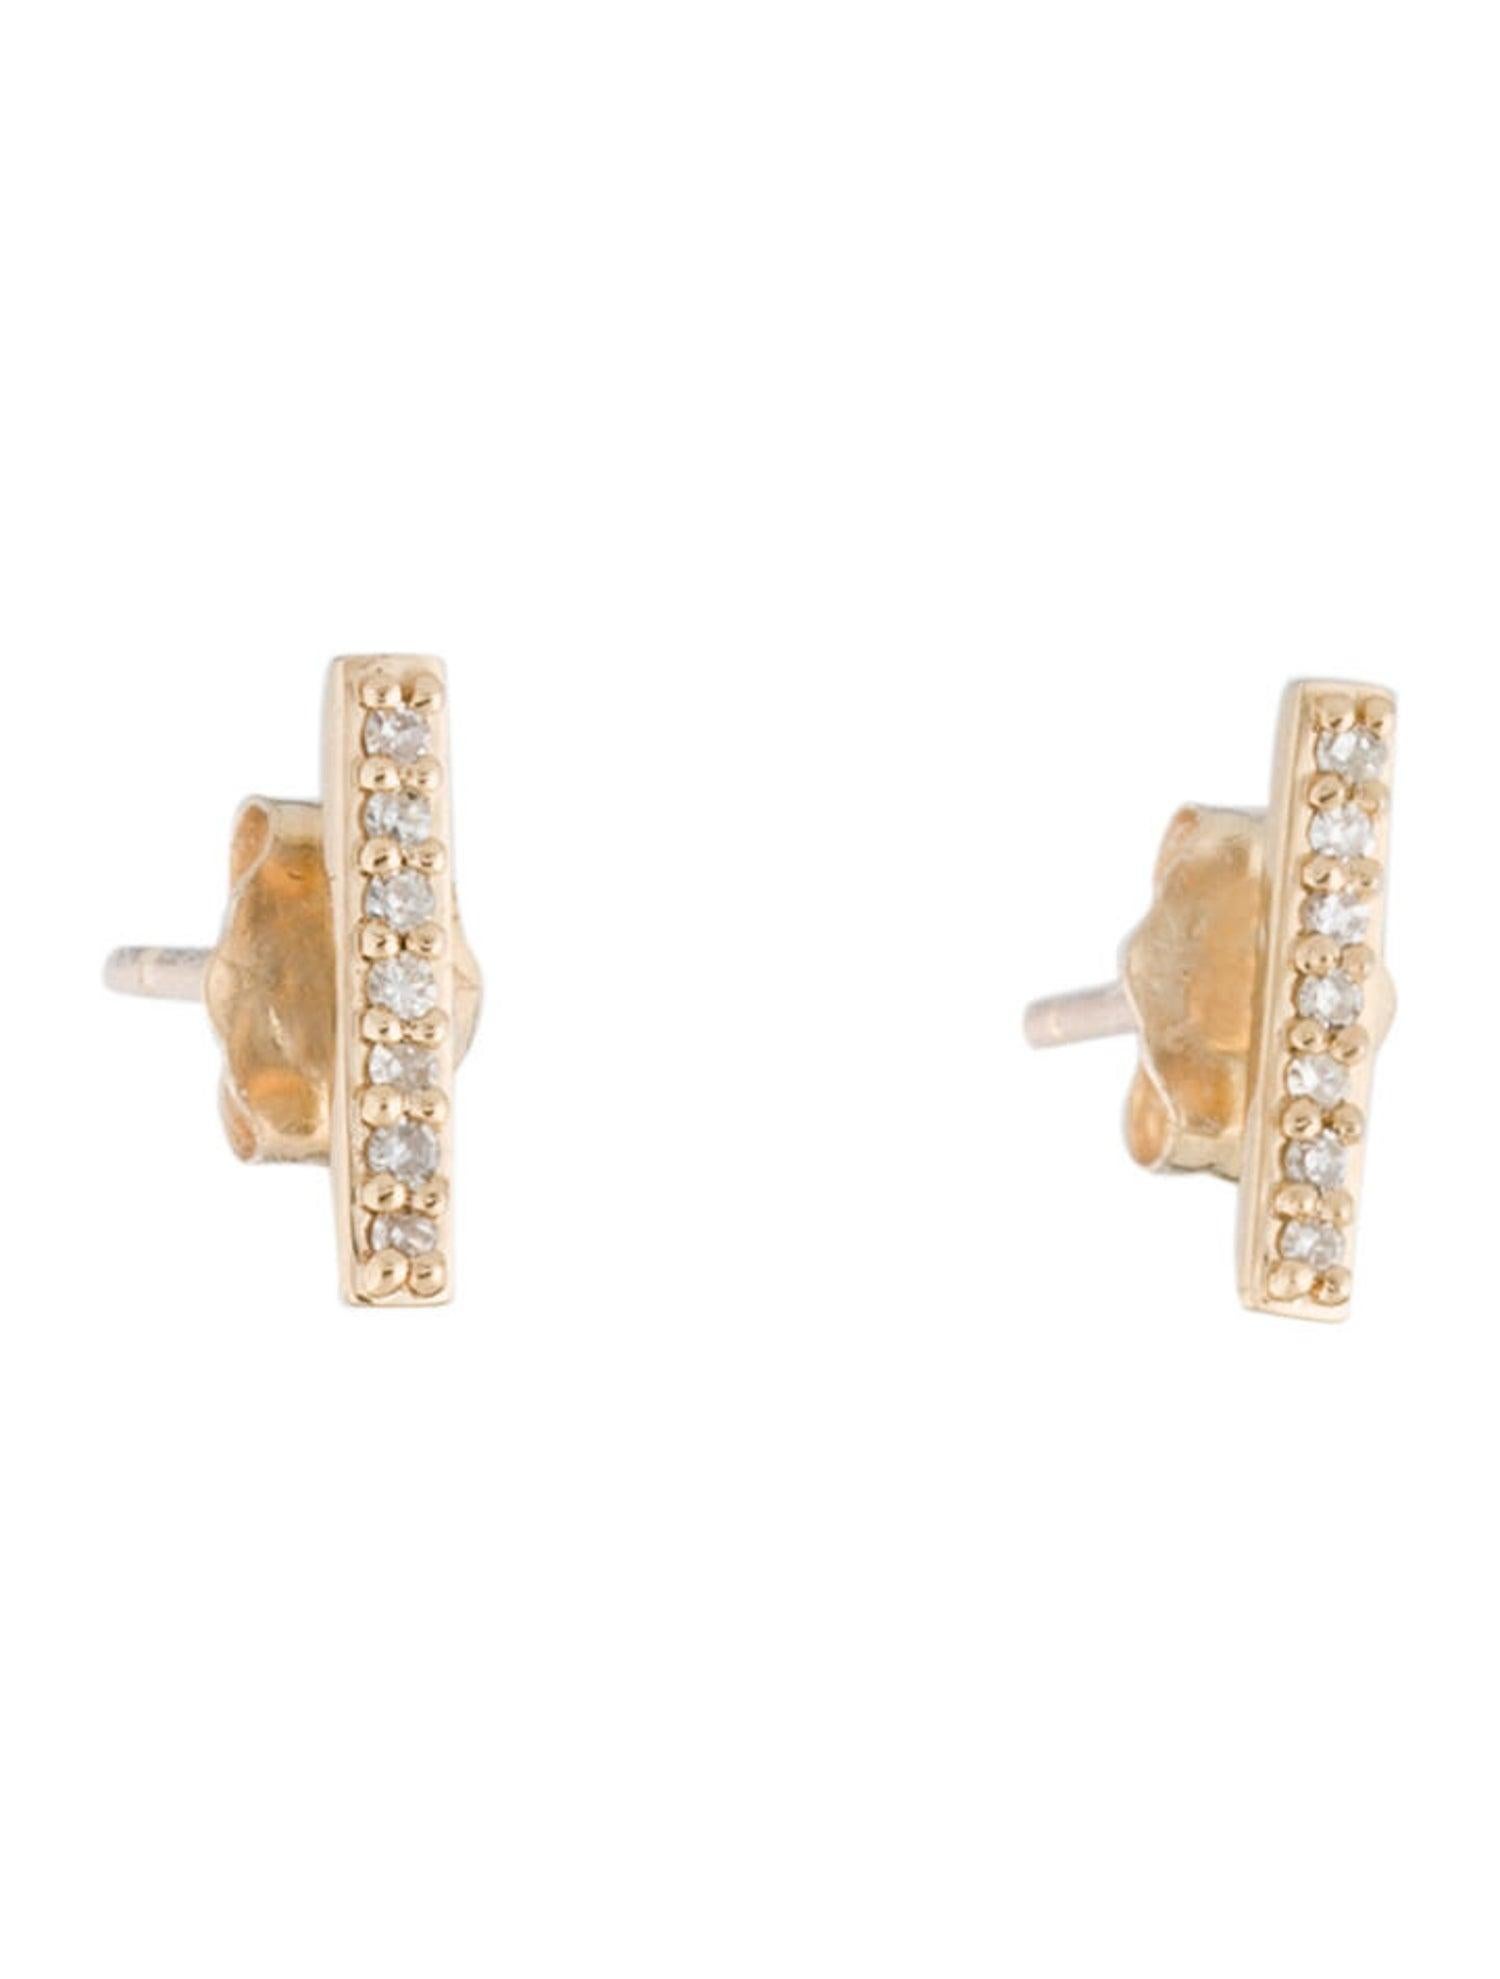 Contemporary 14k Yellow Gold 0.07 Carat Diamond Bar Earrings For Sale